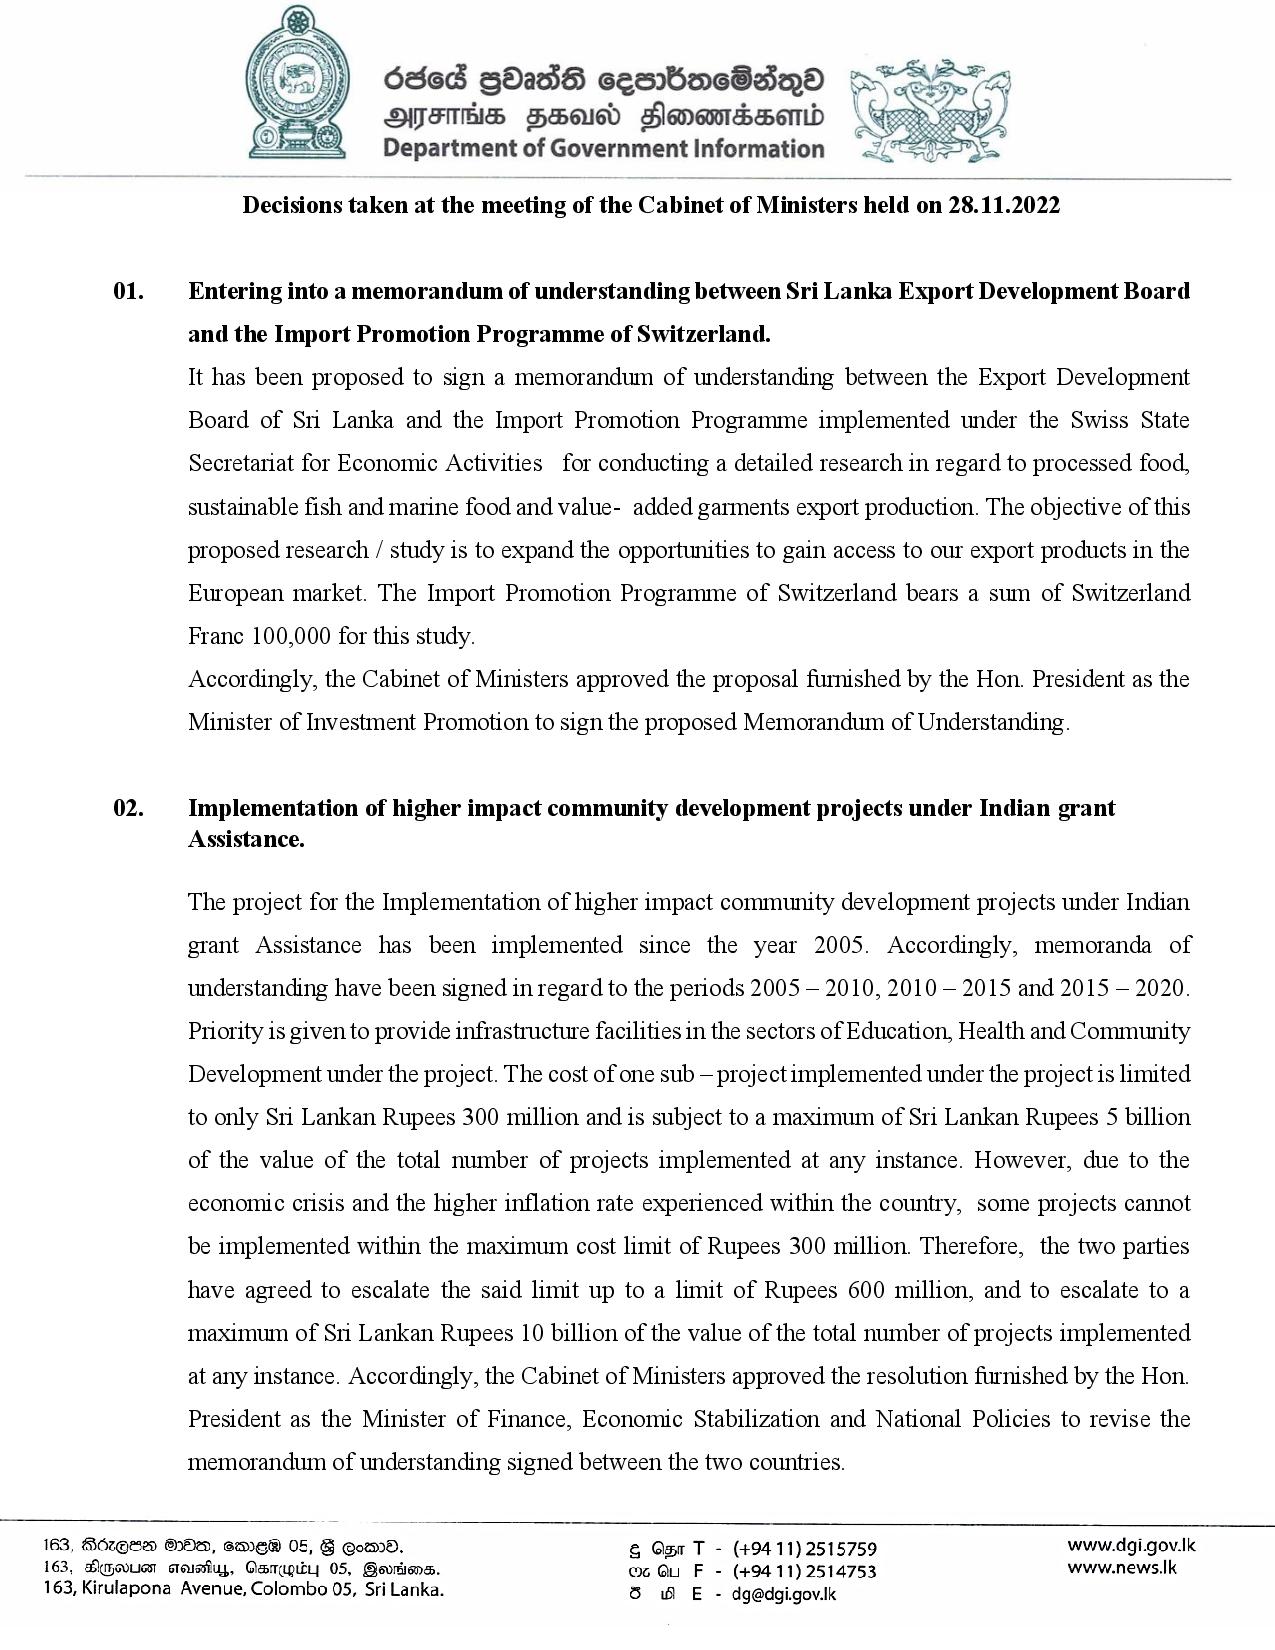 Cabinet Decisions on 28.11.2022 English page 001